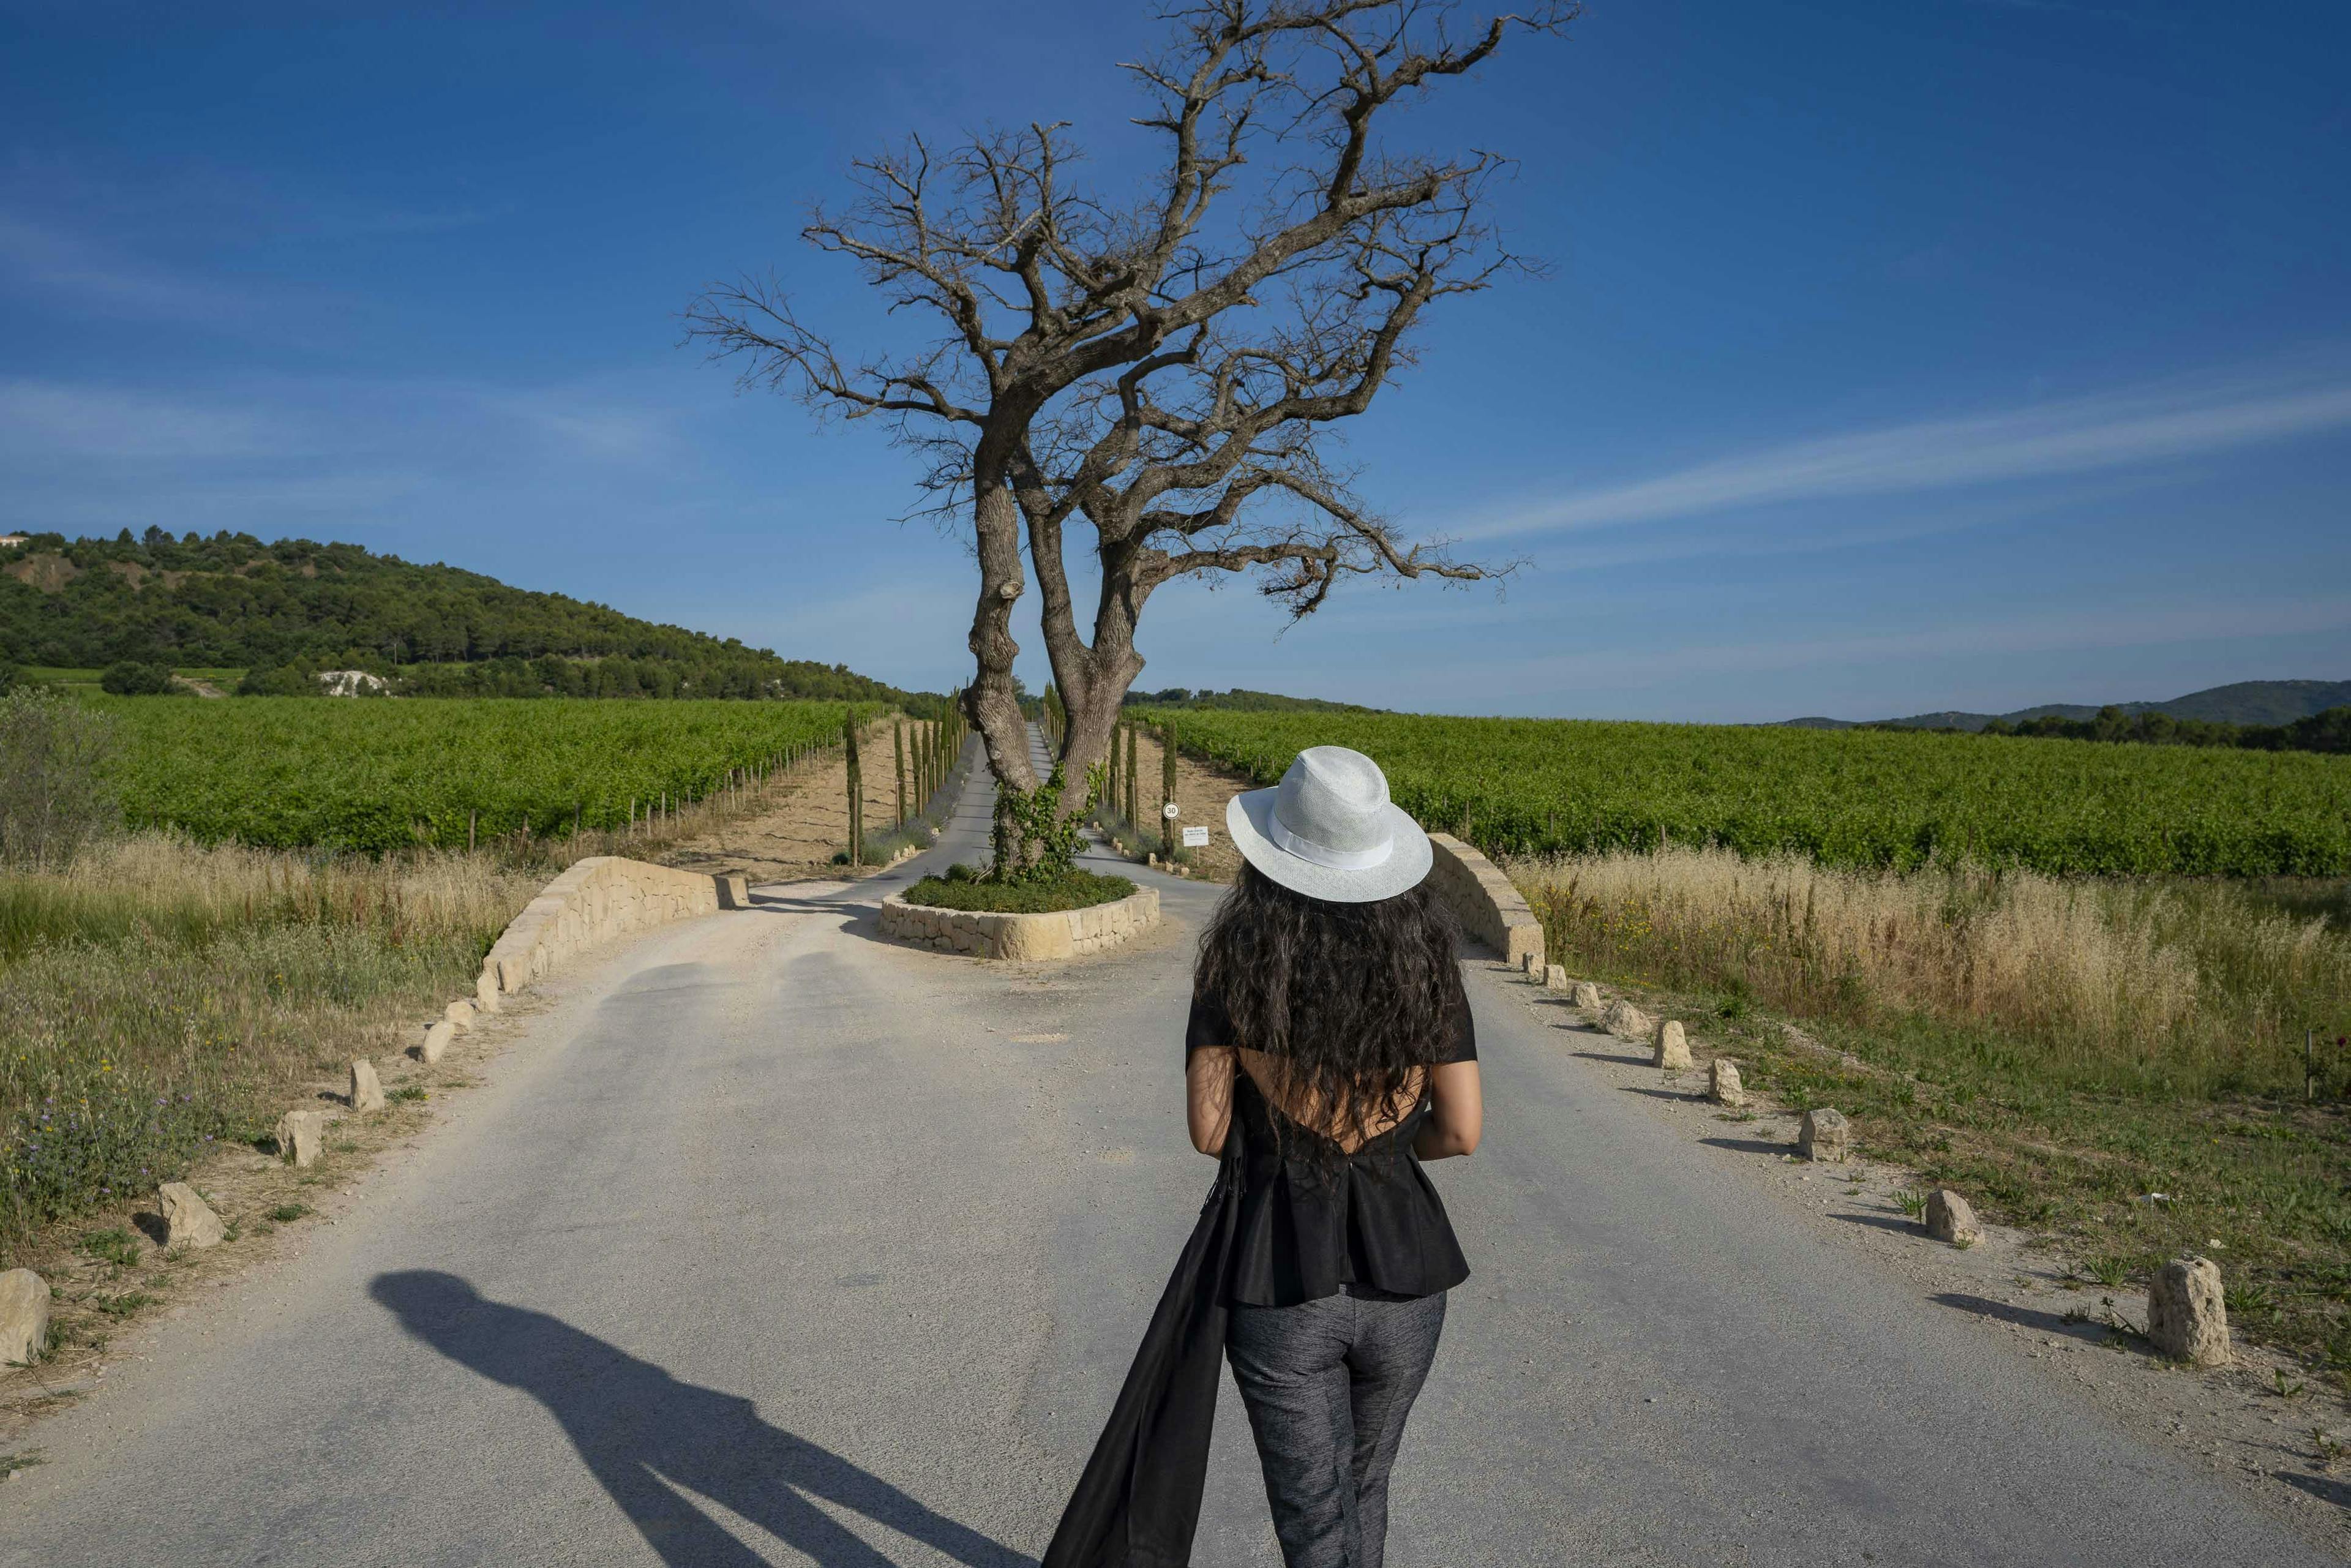 person walking hat sun hat tree pants photography road adult woman